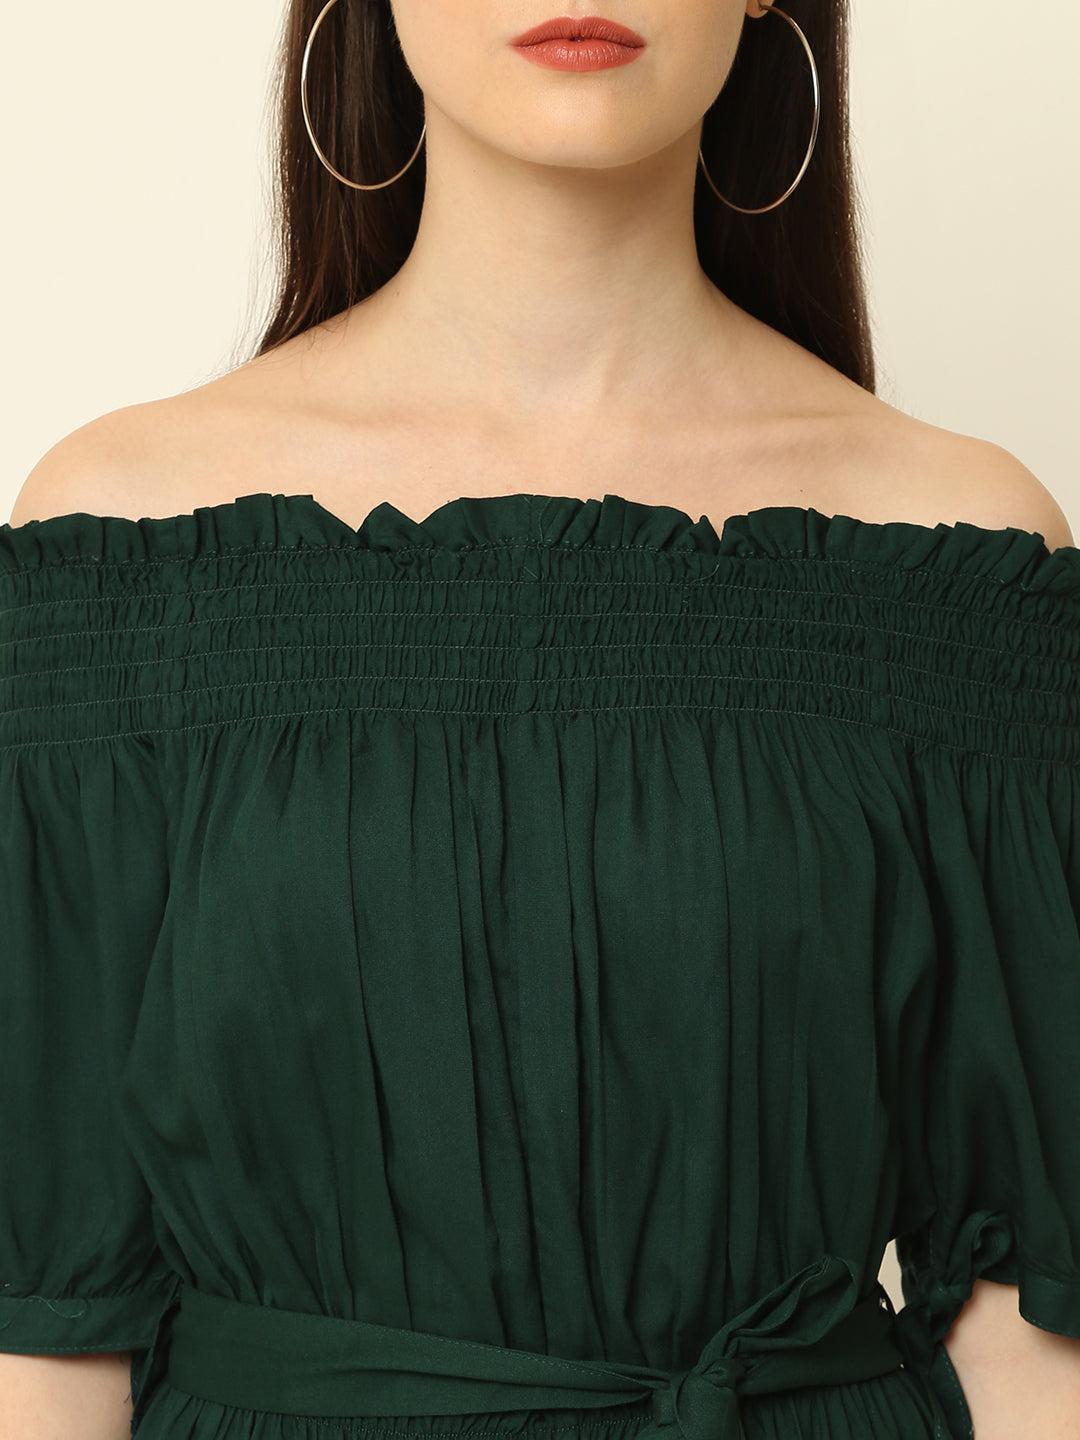 Bottole Green Off Shoulder High Low One Piece Dress